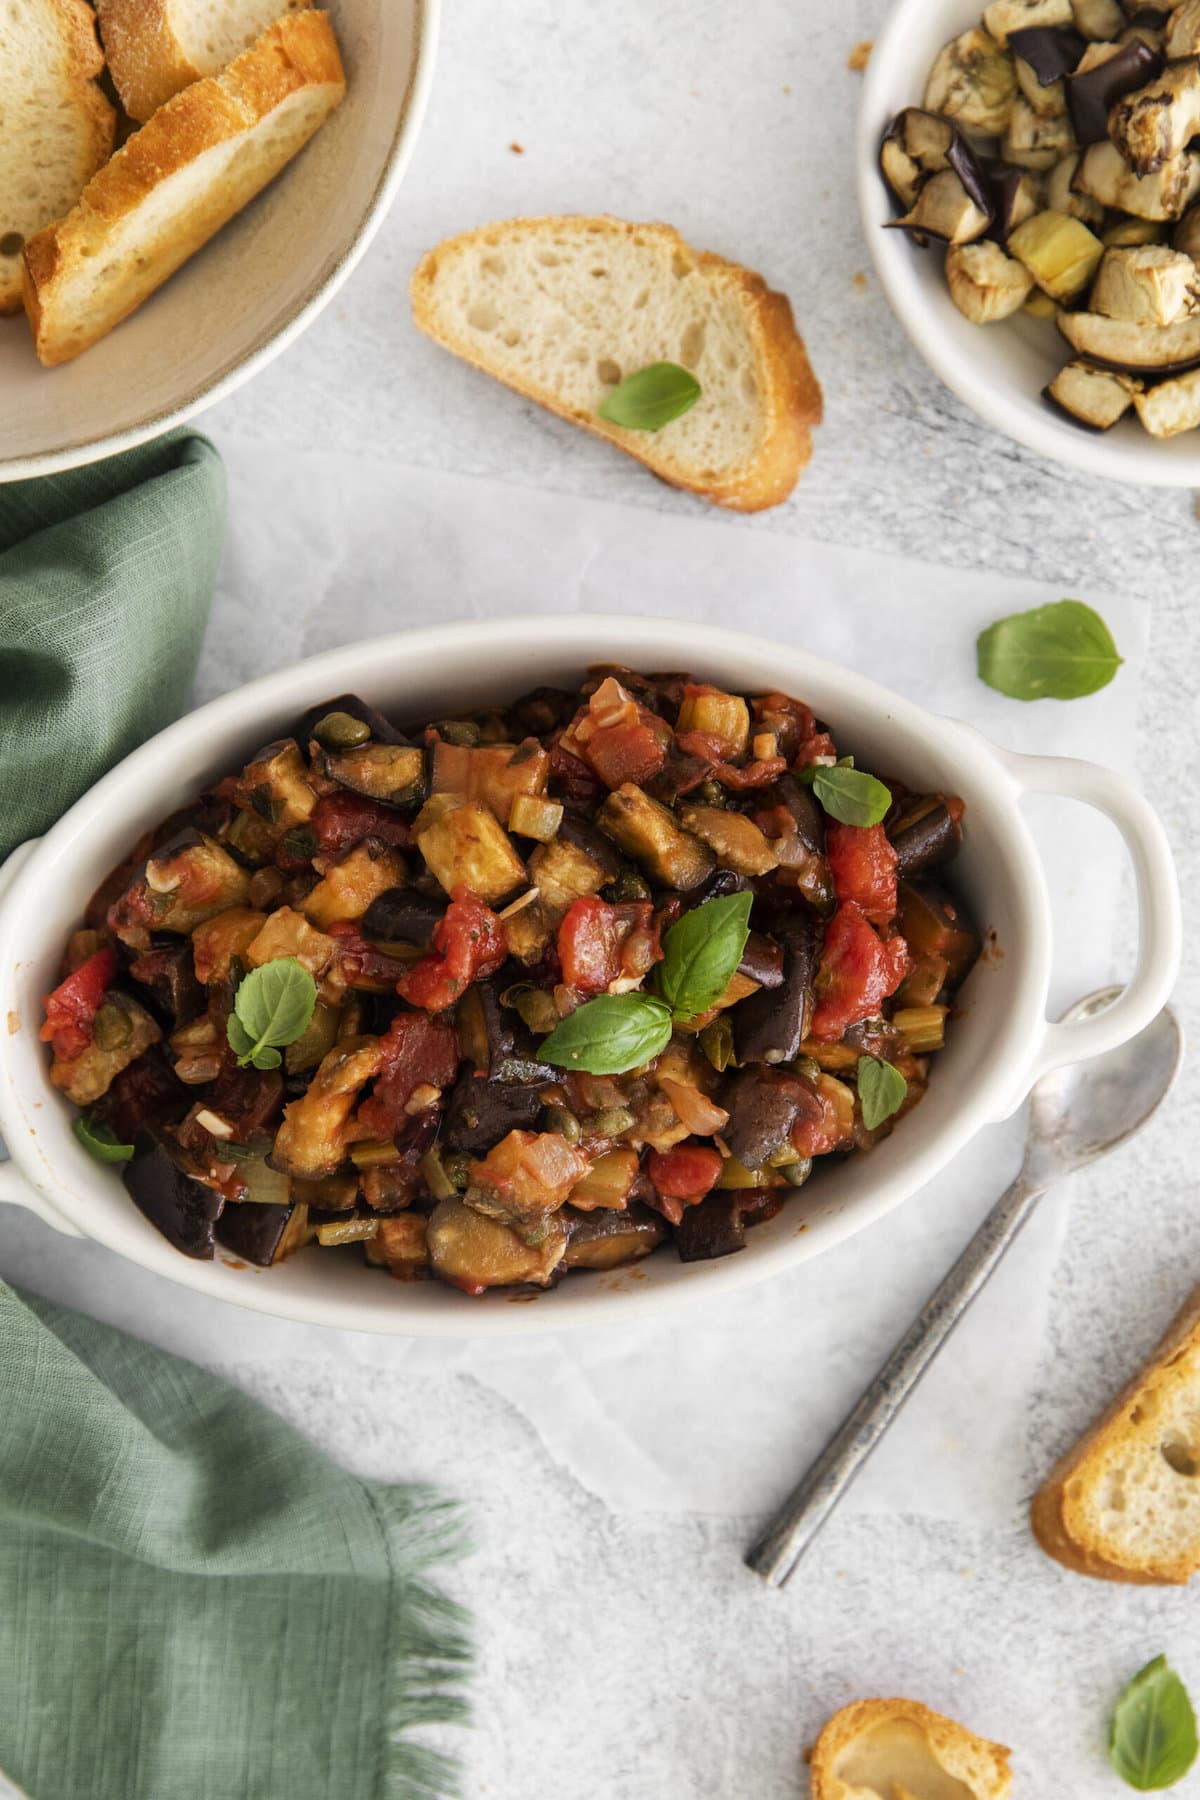 picture of baked eggplant caponata in a white dish with basil leaves on top on a table next to a spoon